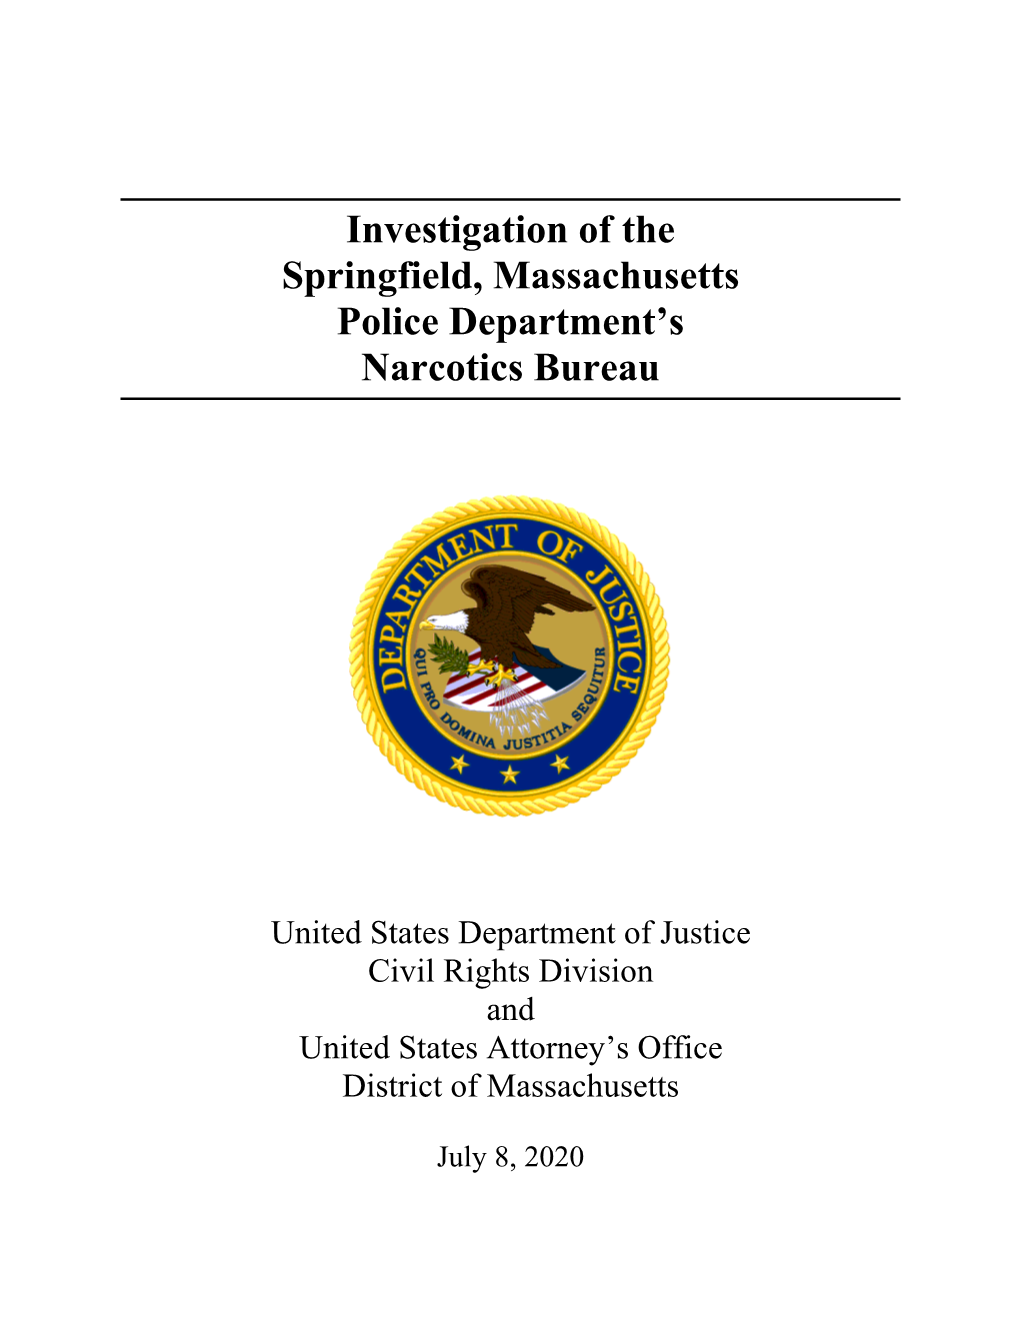 Investigation of the Springfield, Massachusetts Police Department's